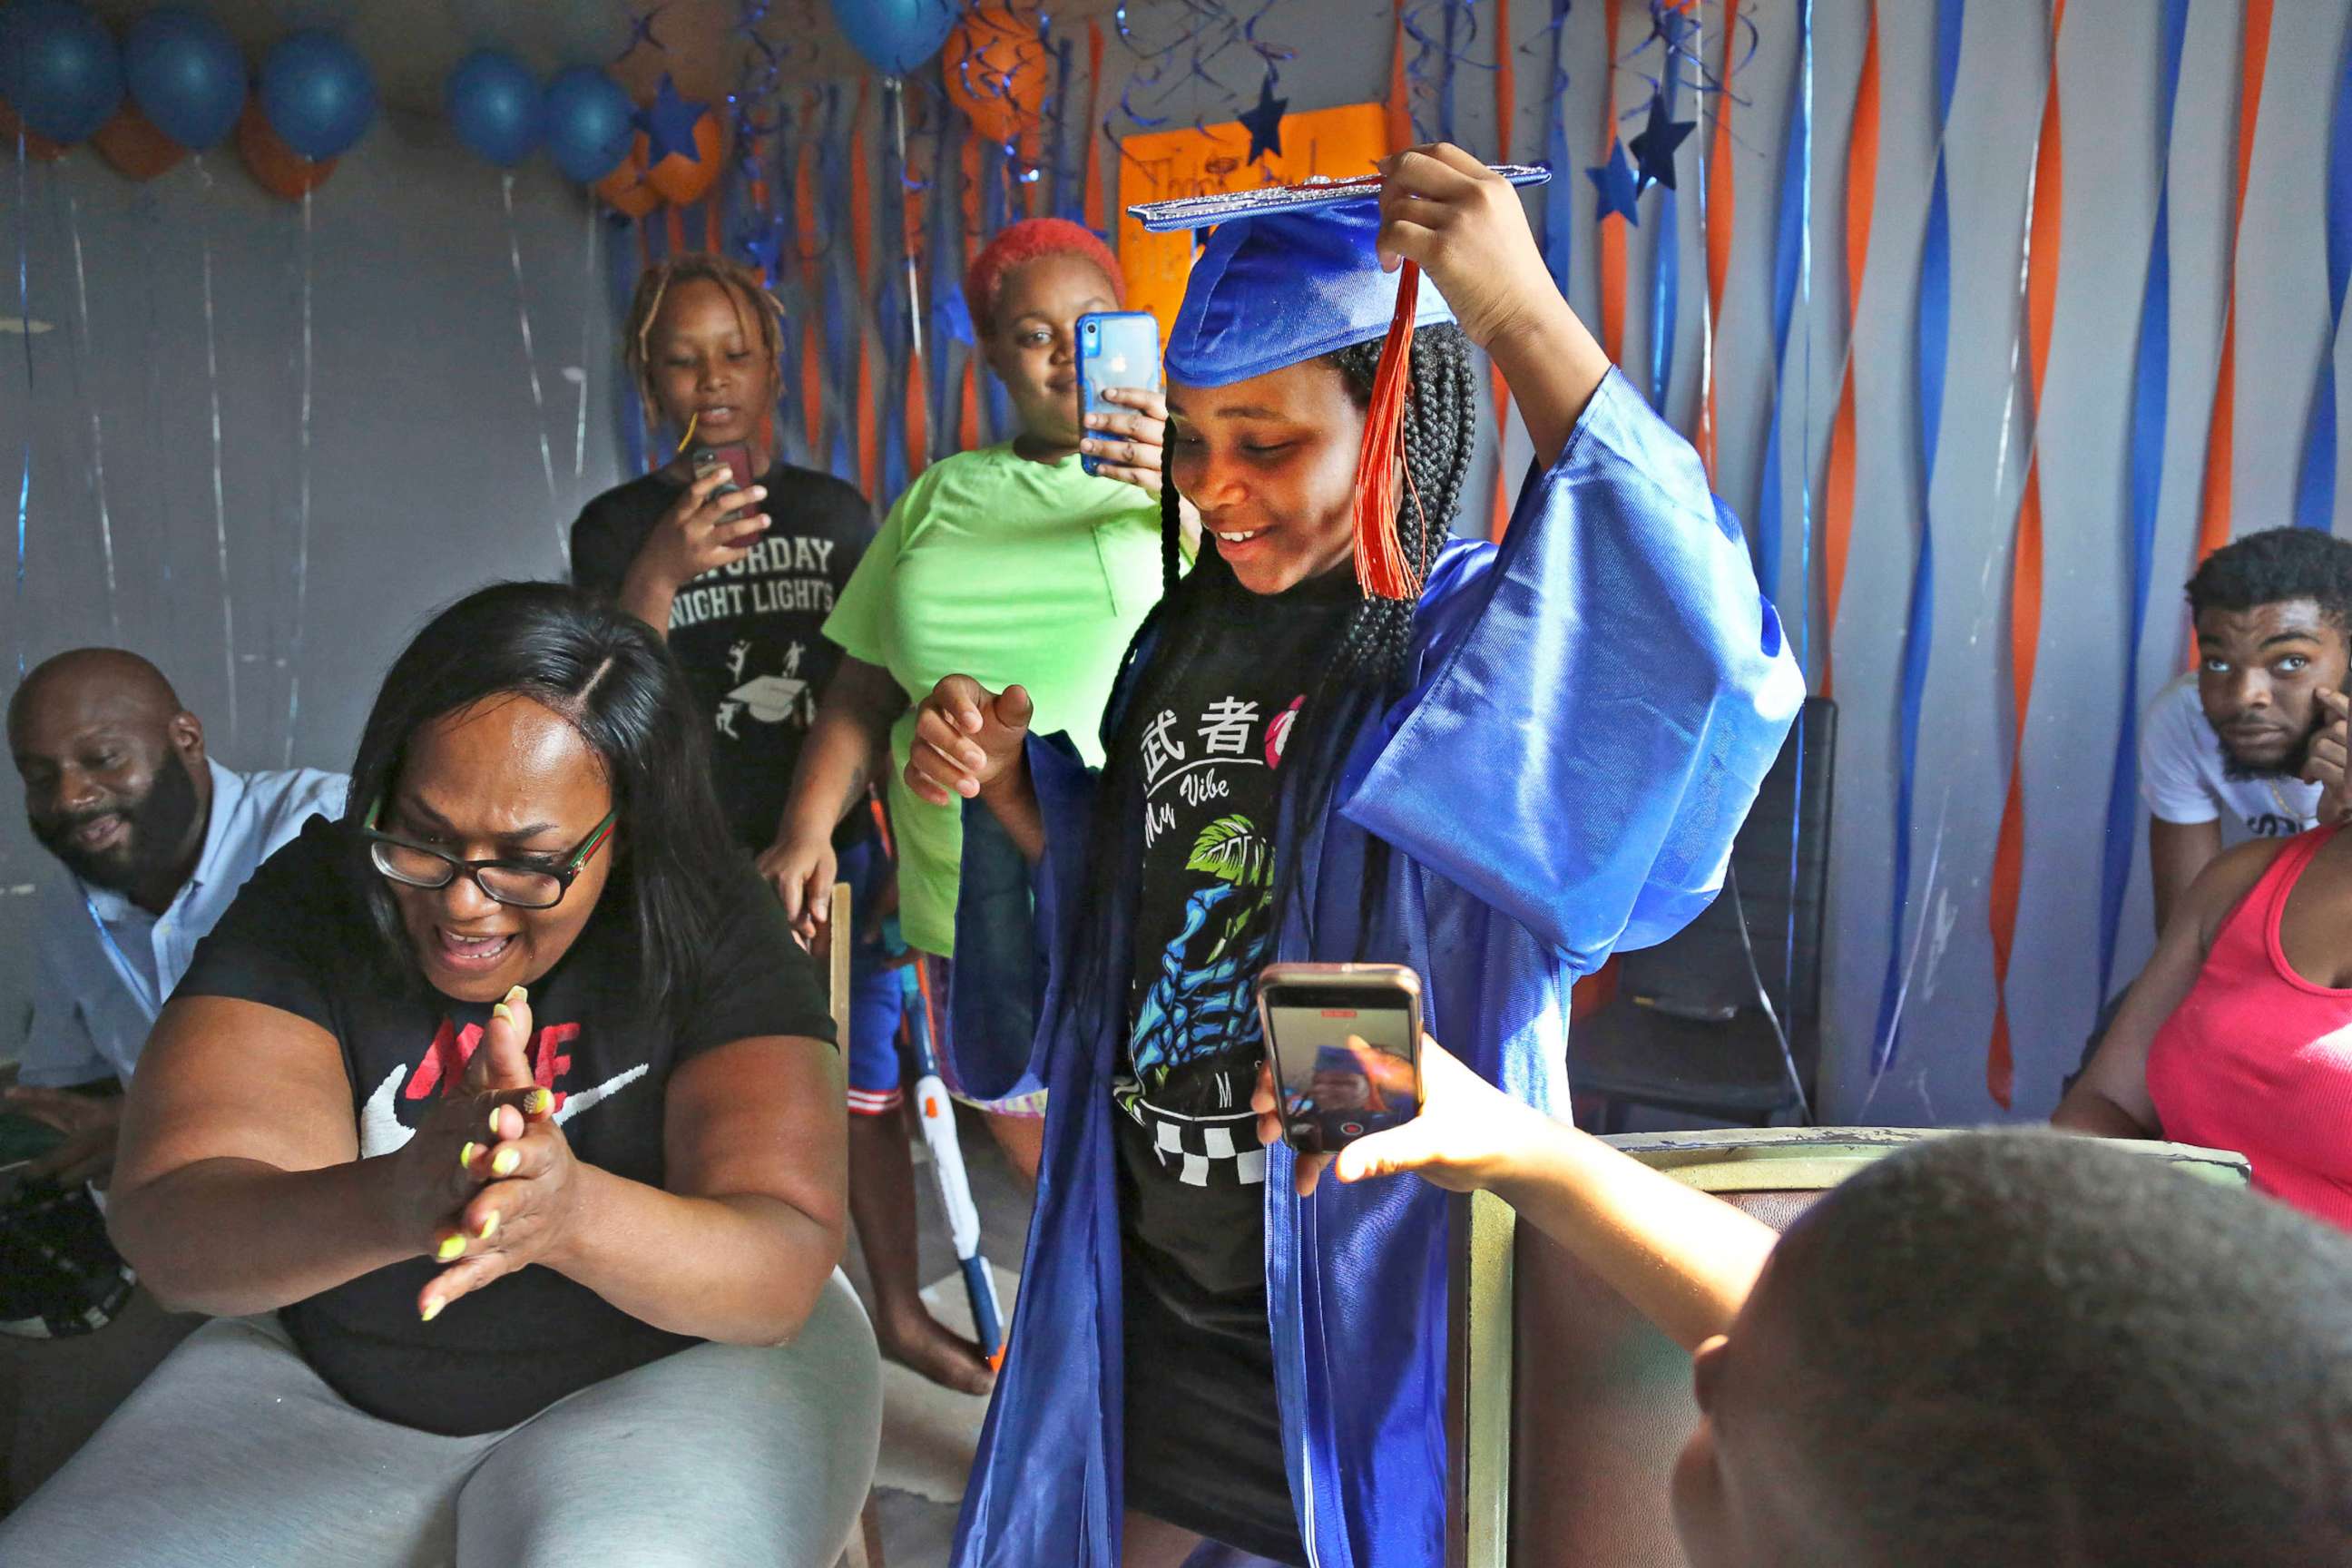 PHOTO: Sharawn Vinson, front left, and family members and friends cheer for her daughter, Maddison Washington, 11, as they watch her virtual graduation from middle school in their apartment in the Brooklyn borough of New York on Aug. 21, 2020.